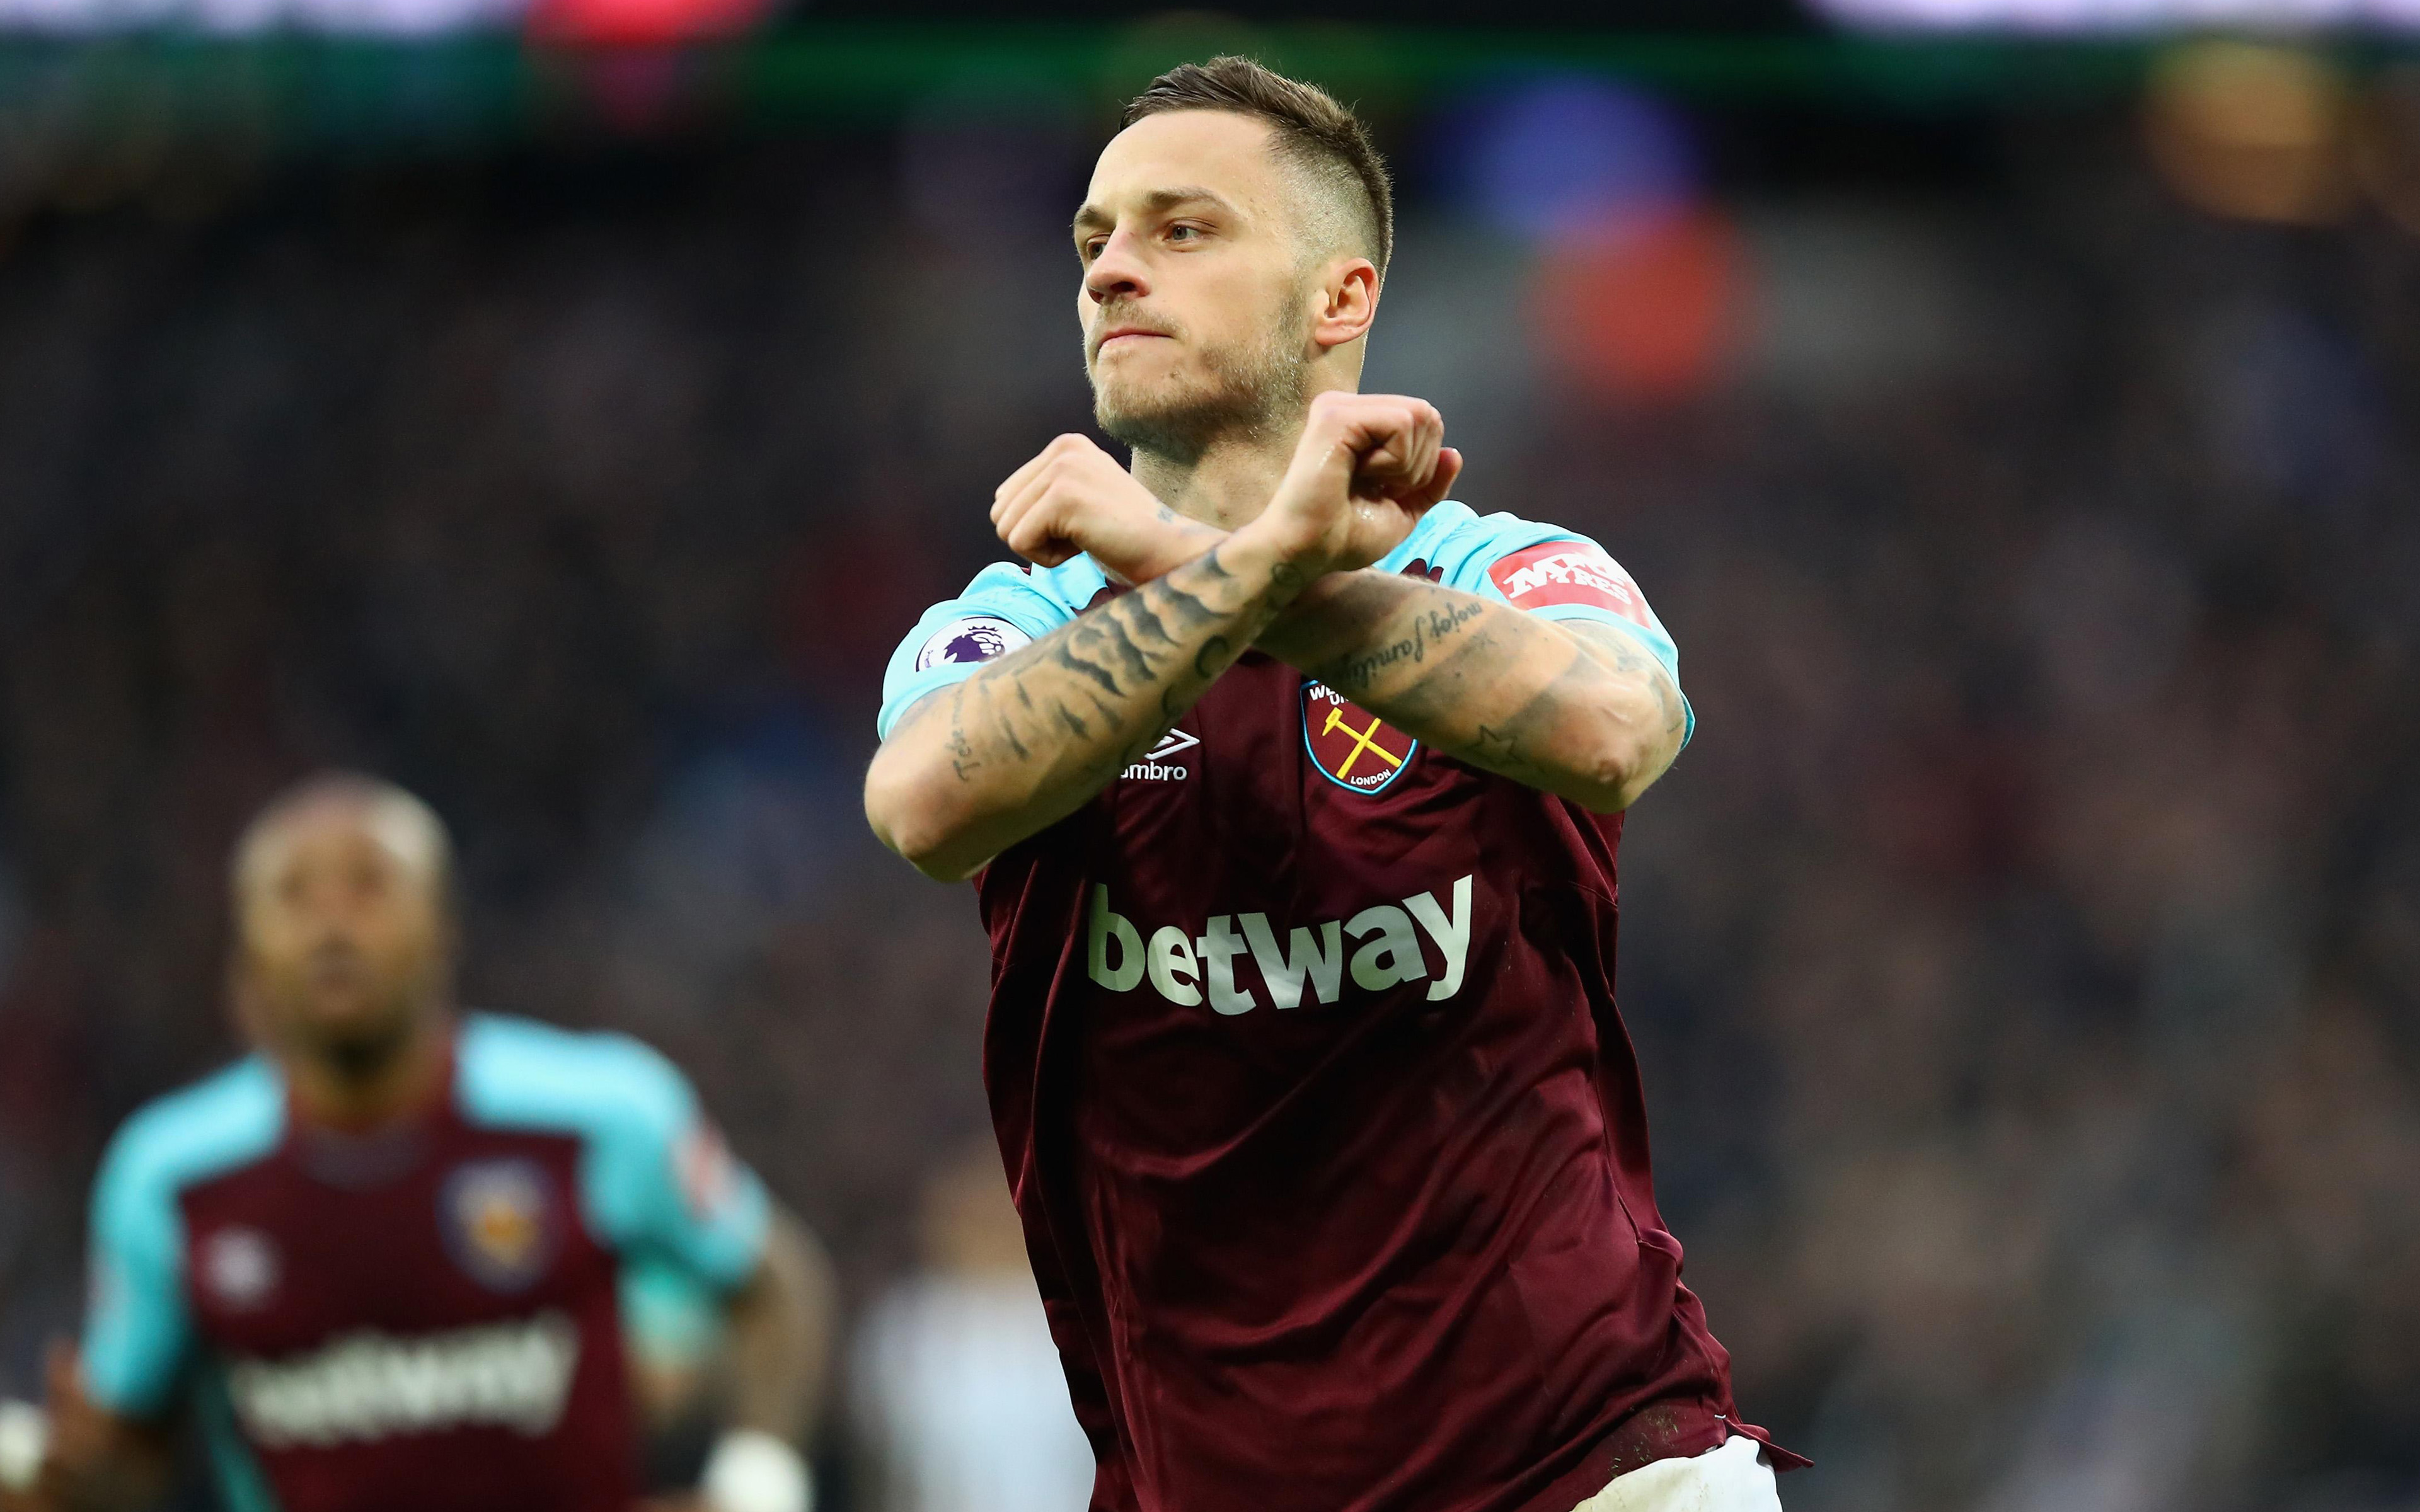 Download wallpaper Marko Arnautovic, 4k, Austrian football player, West Ham United FC, Premier League, England, football for desktop with resolution 3840x2400. High Quality HD picture wallpaper